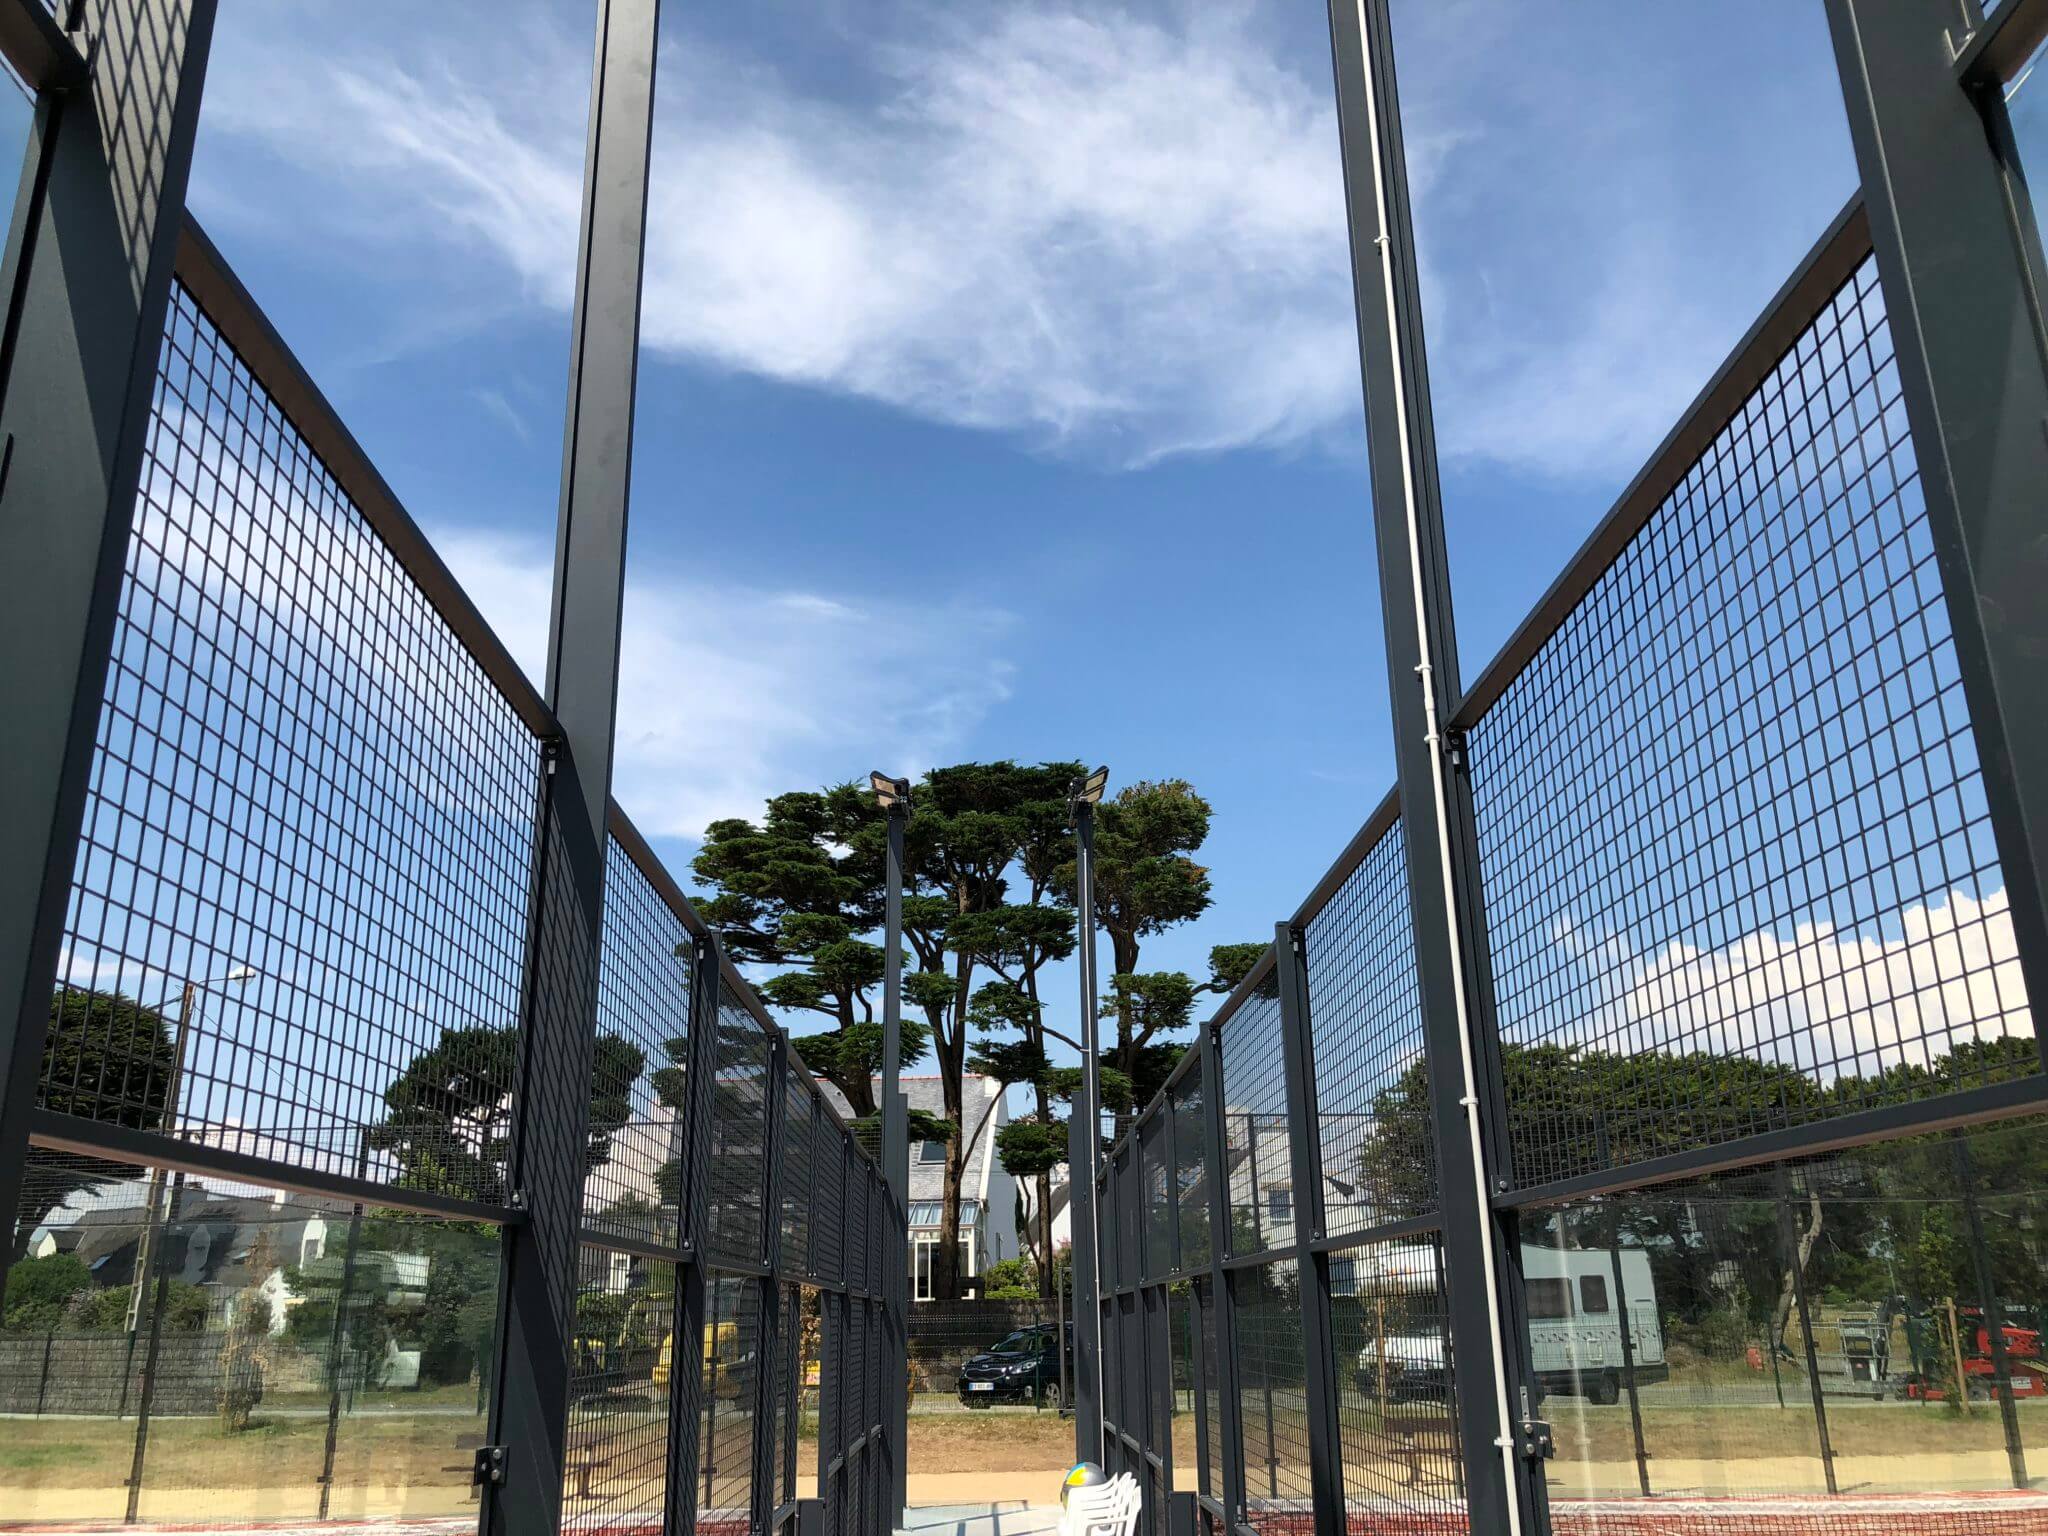 2 courts of padel in Carnac!